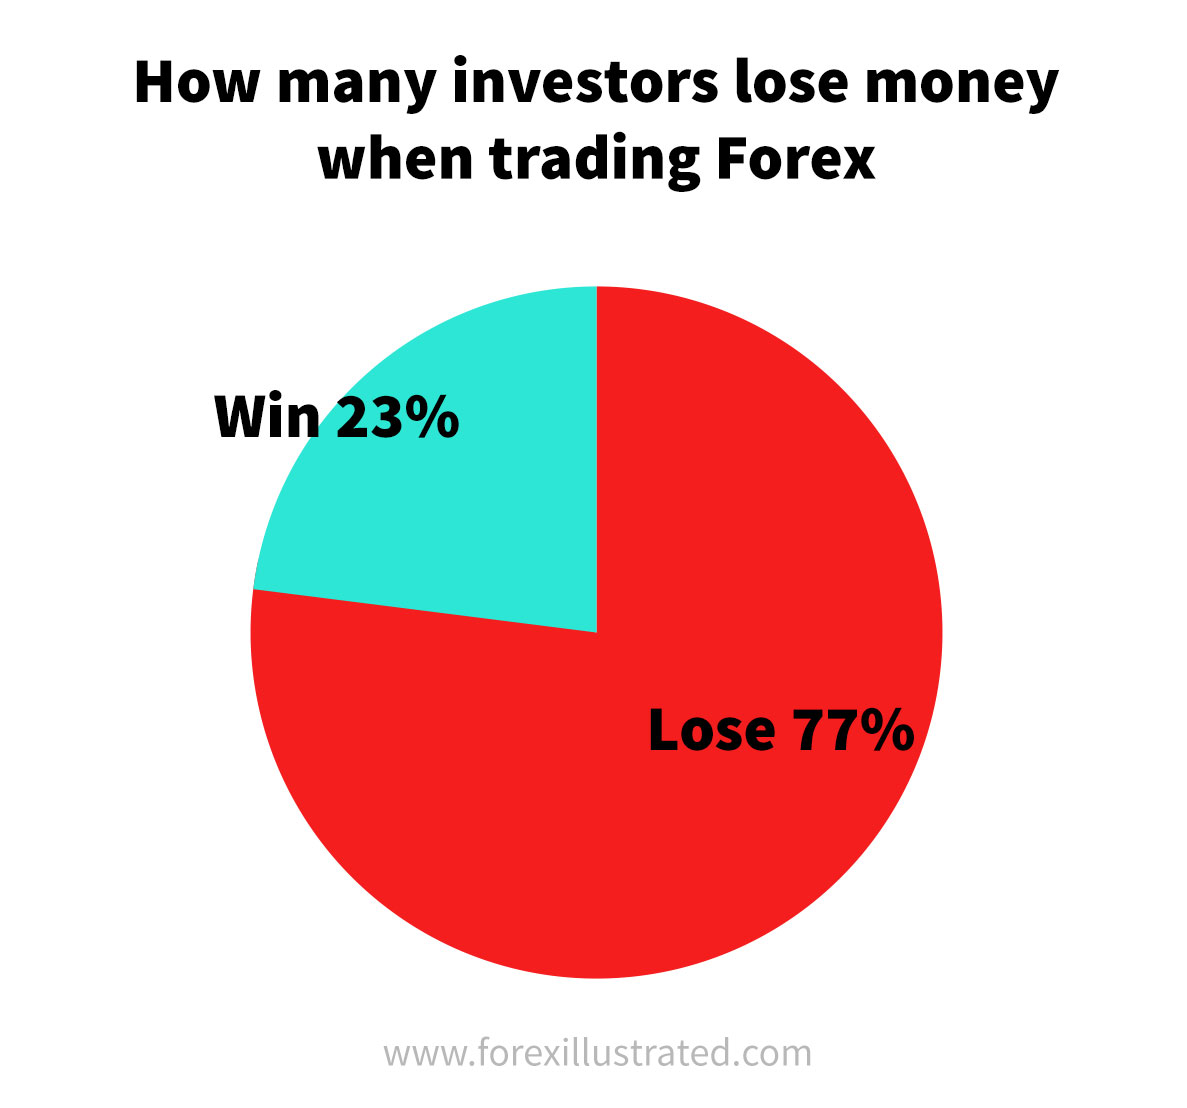 Can you lose money in forex